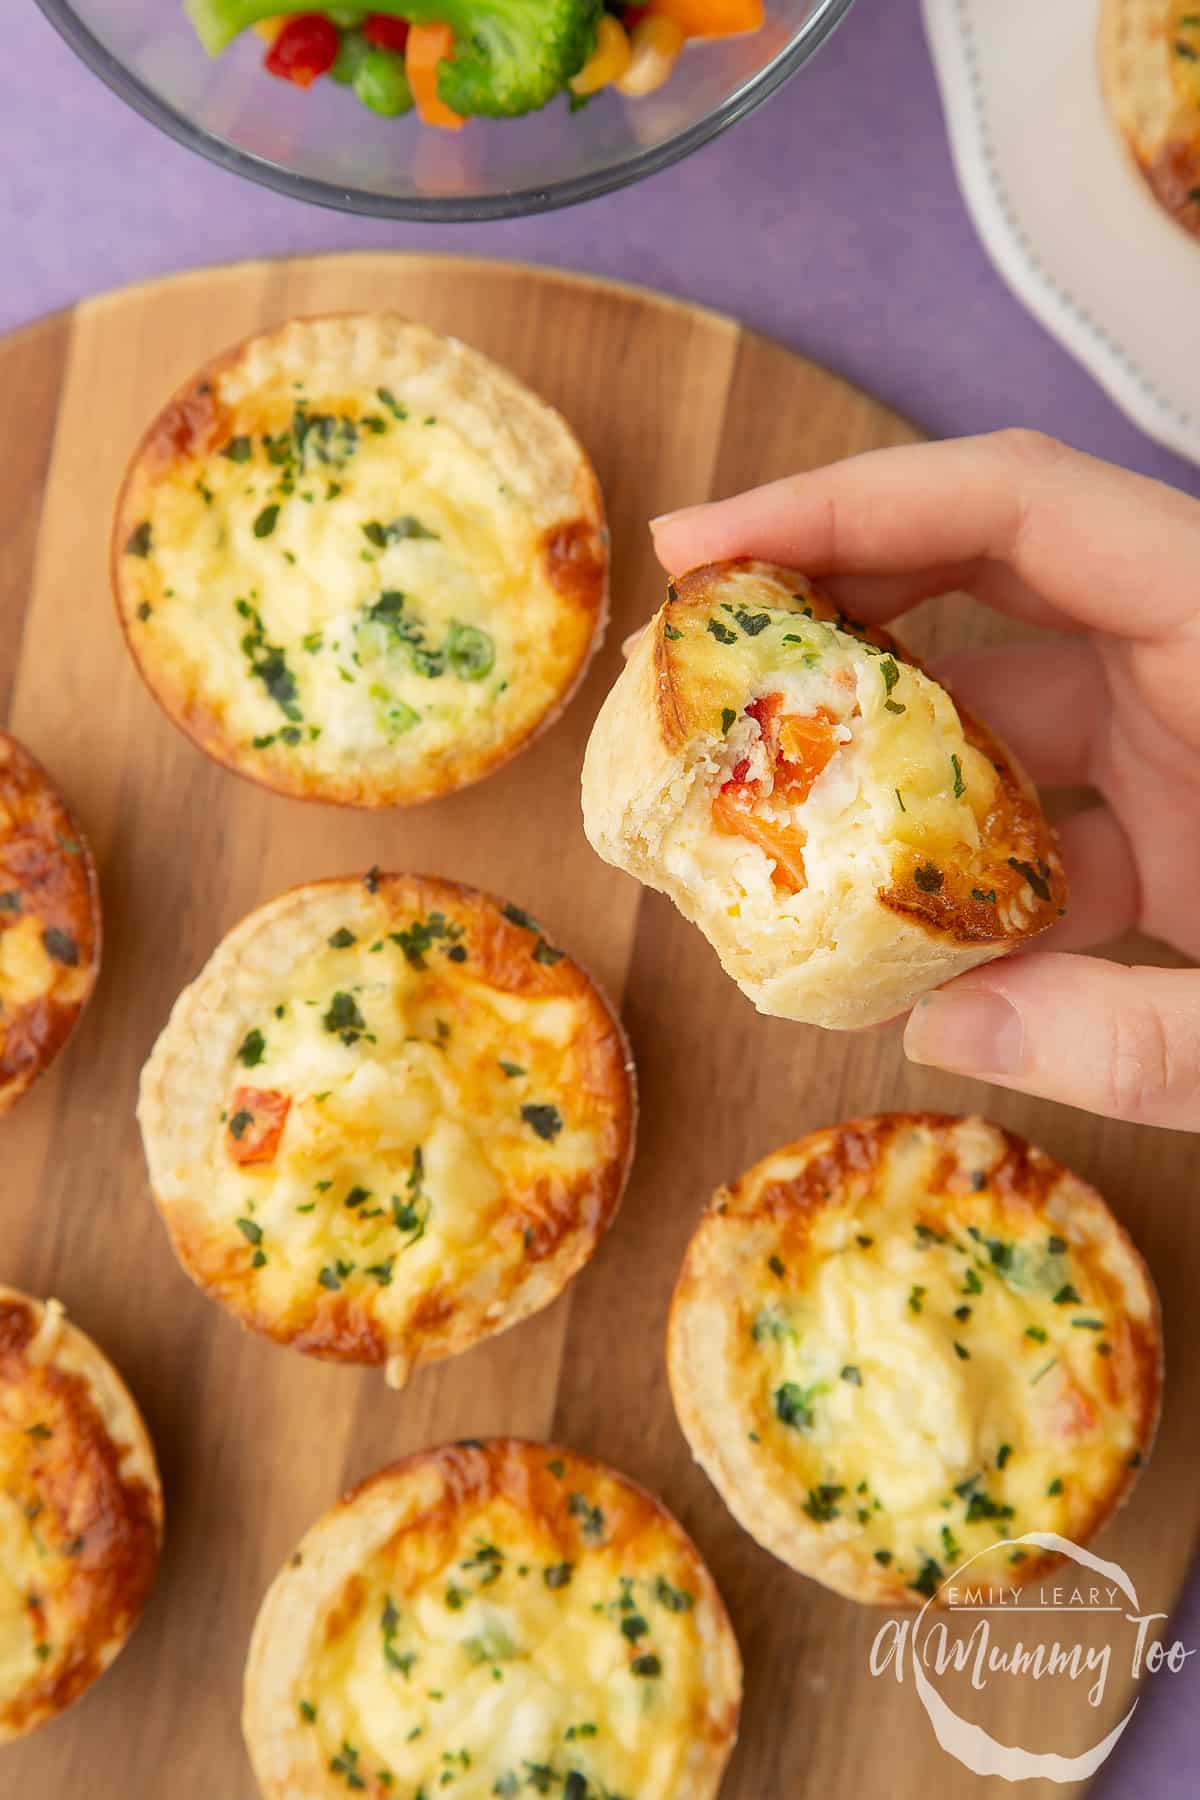 A hand holds a mini vegetable quiche with a bite taken out of it. More mini vegetable quiches are arranged on a wooden board in the background.